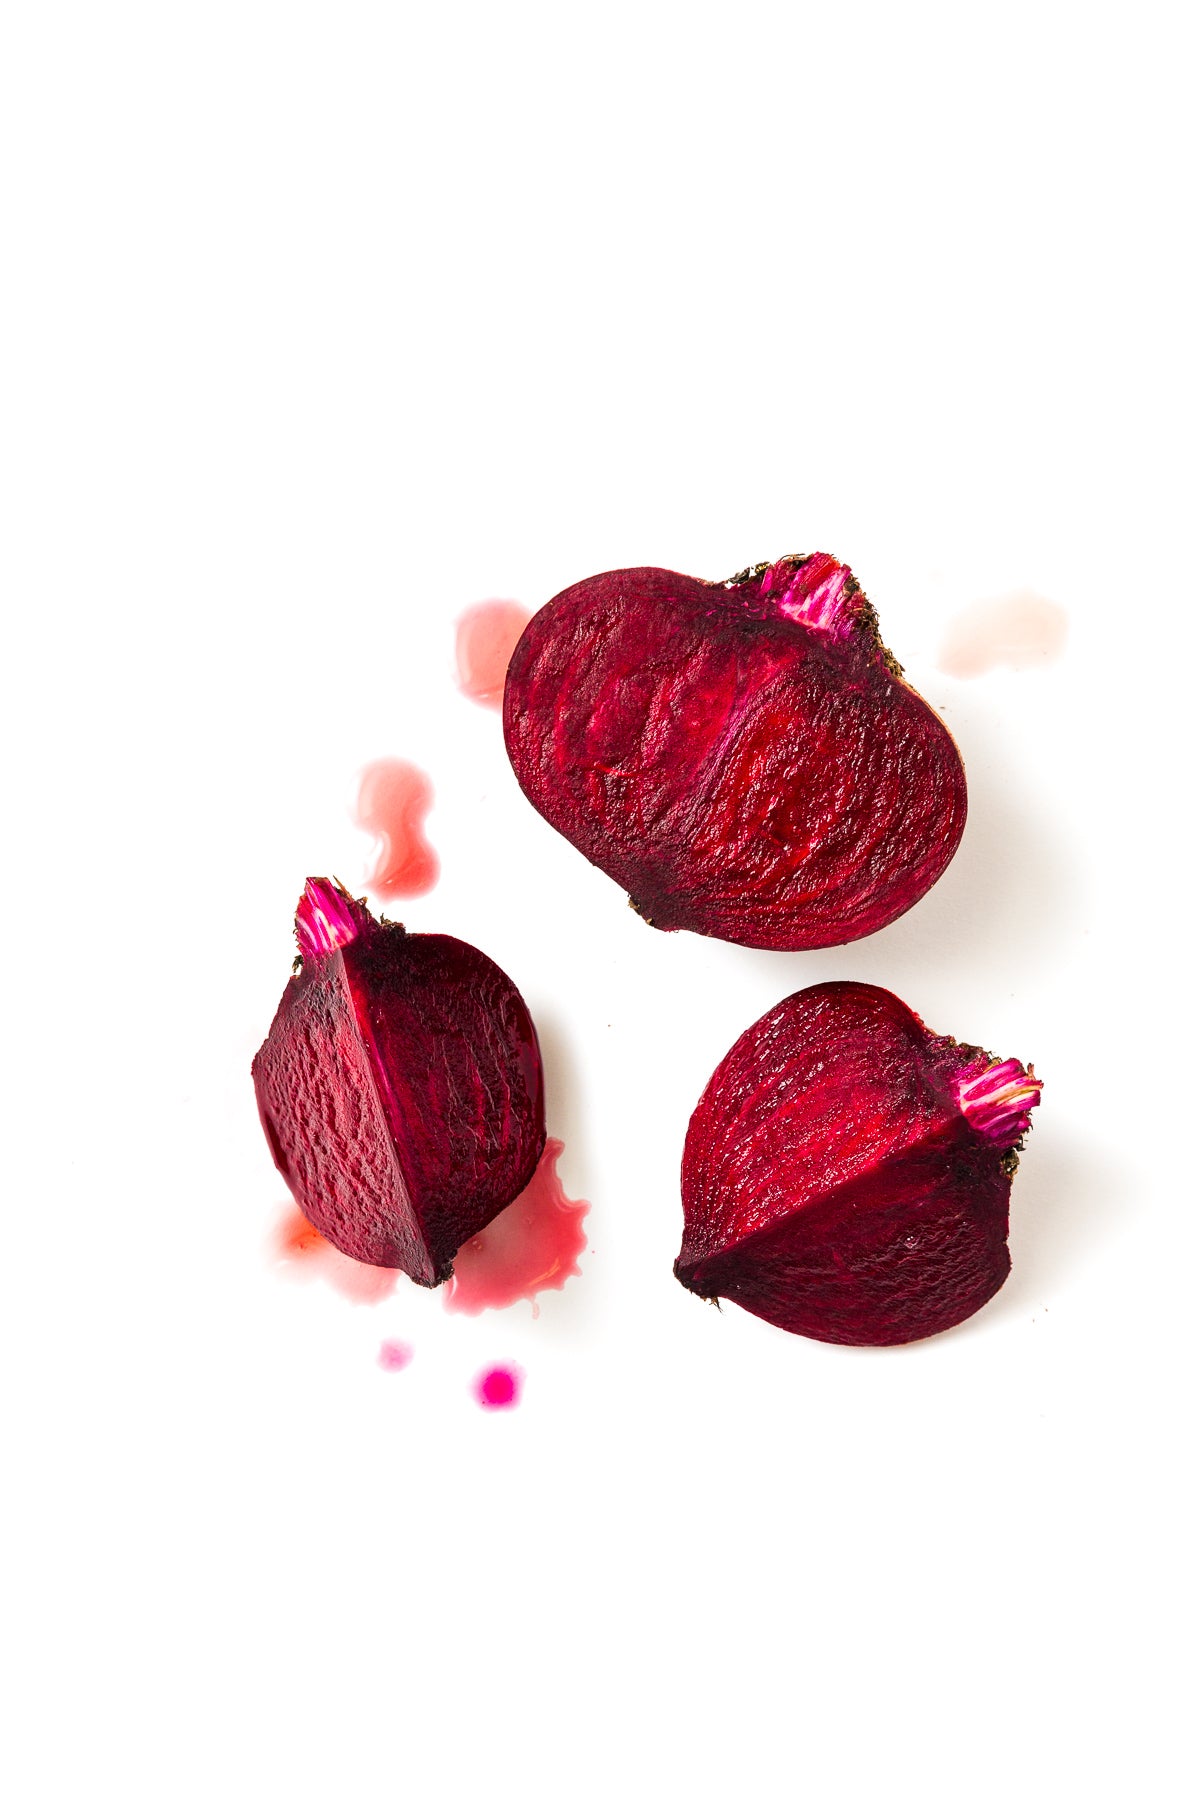 Image of top of three red beets used for Miss Jones Baking Co Beet Red Velvet Layer Cake